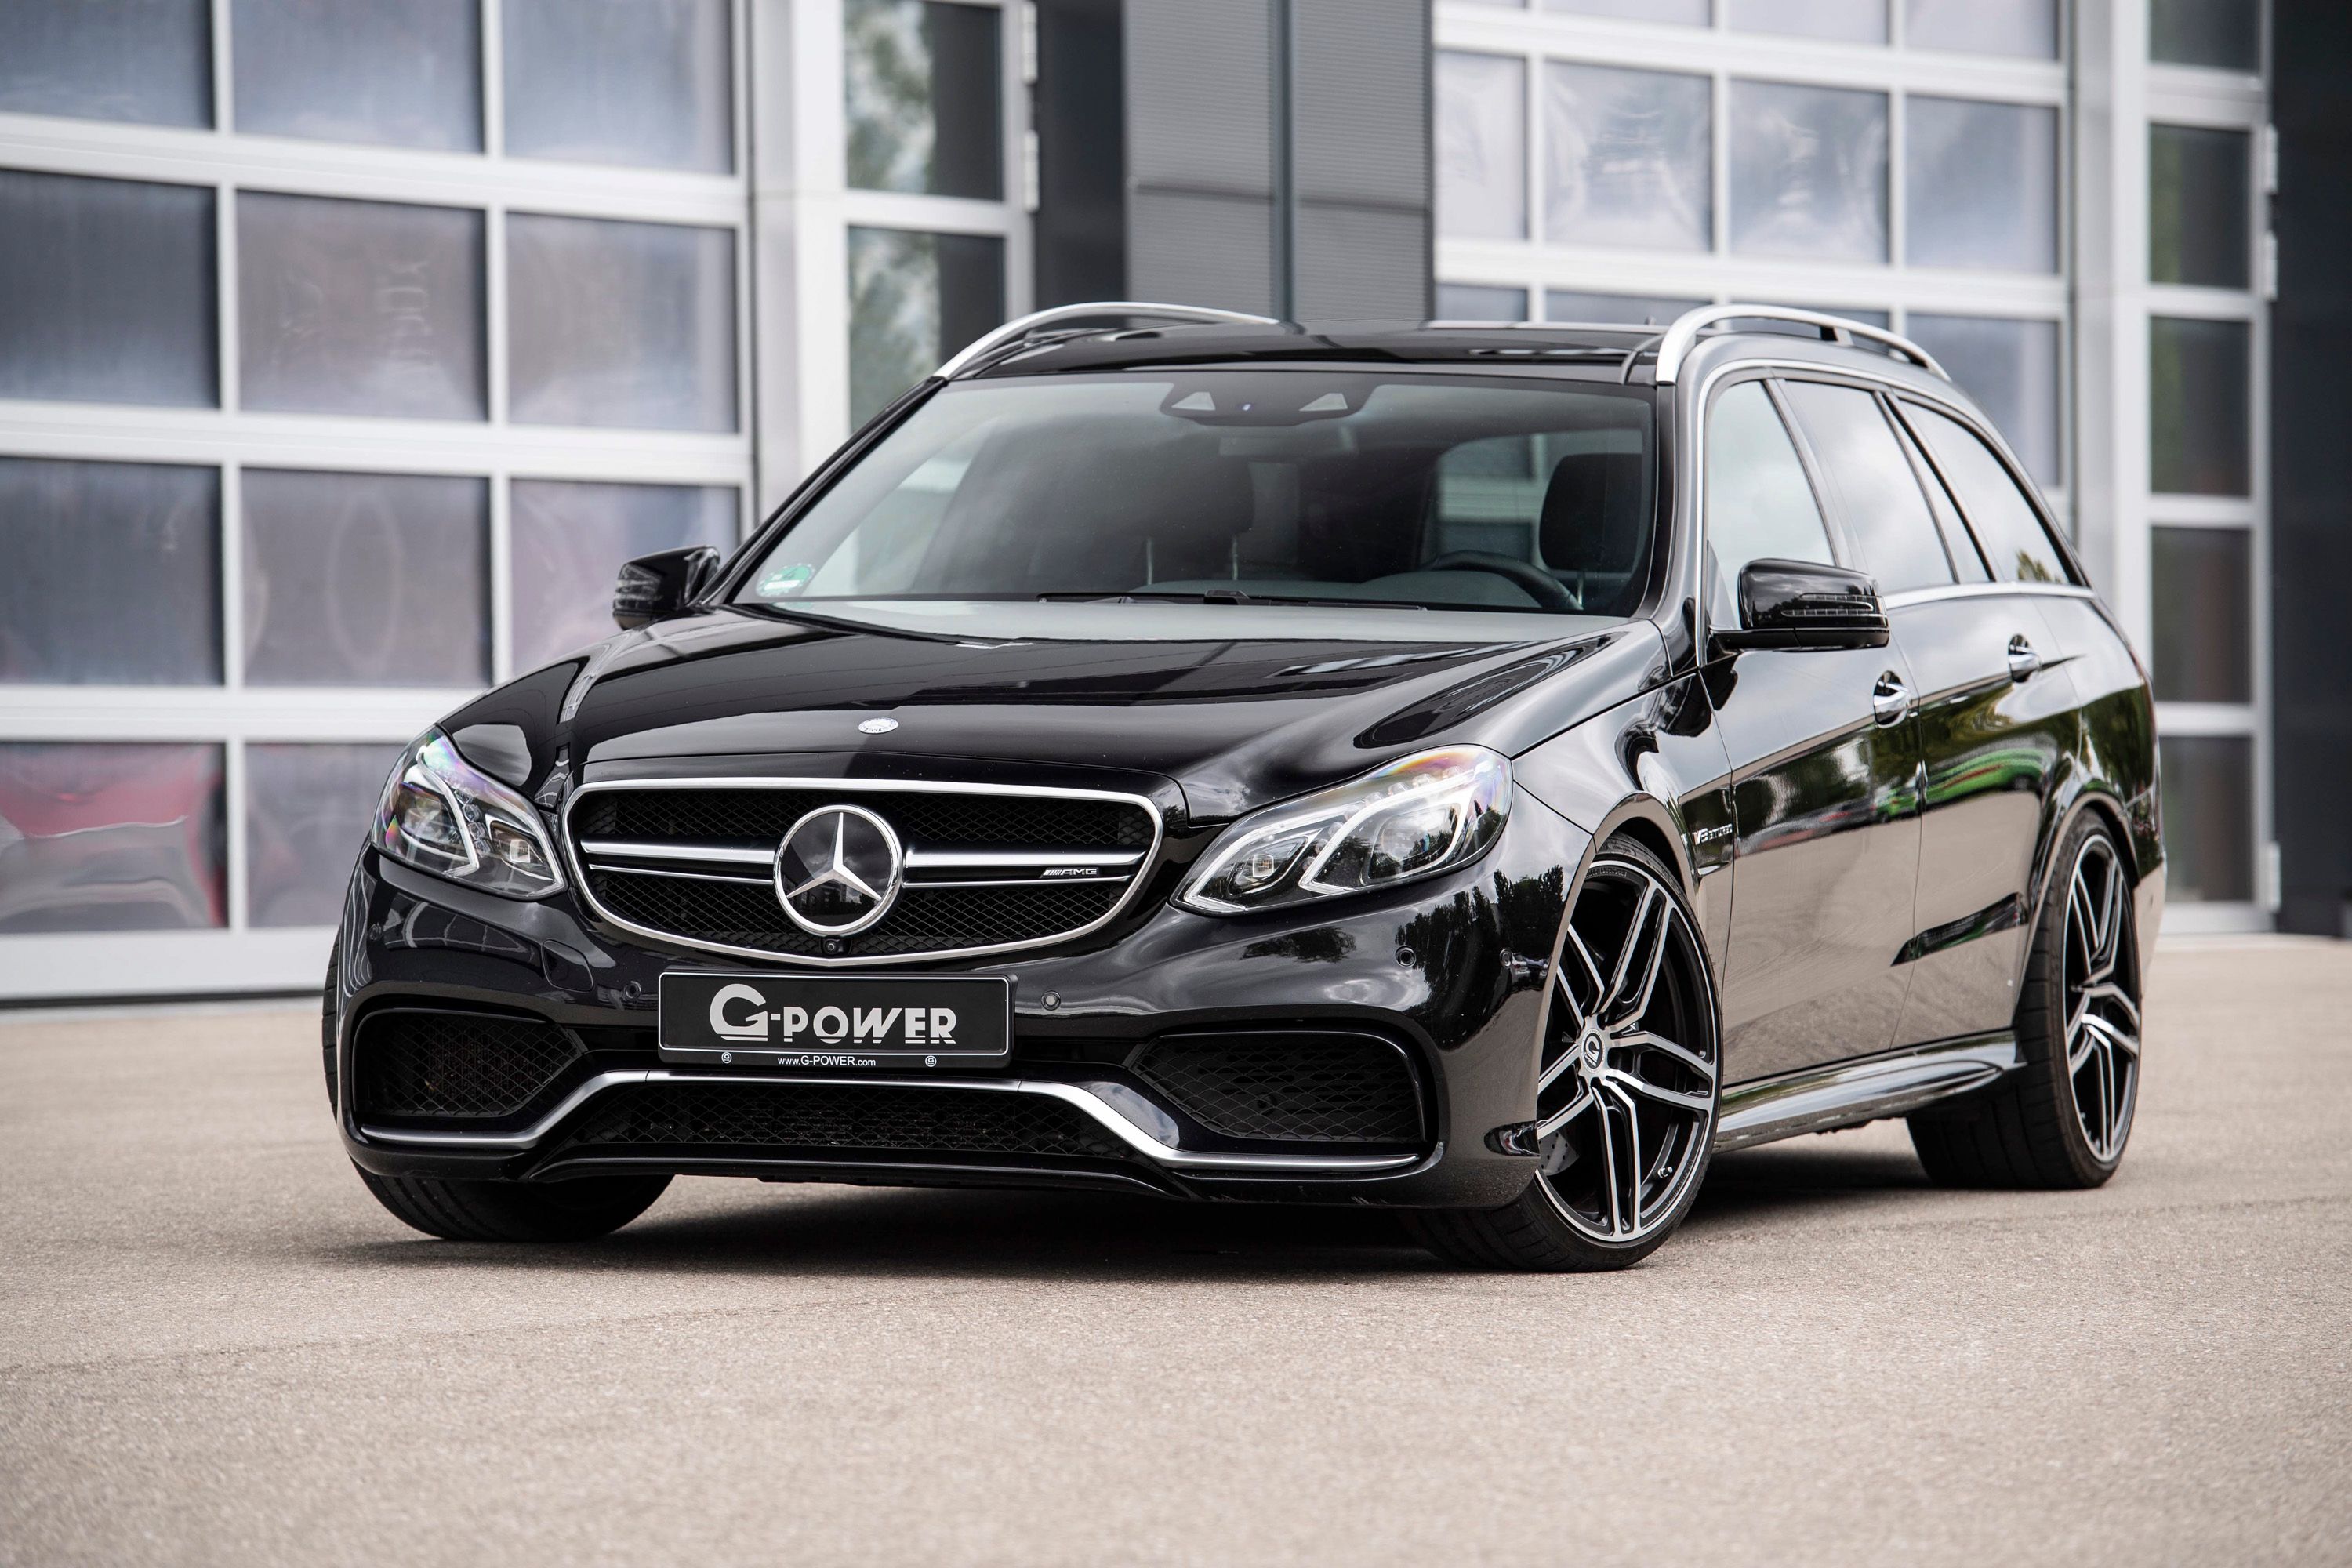 2018 Mercedes-AMG E63 S Wagon by G-Power